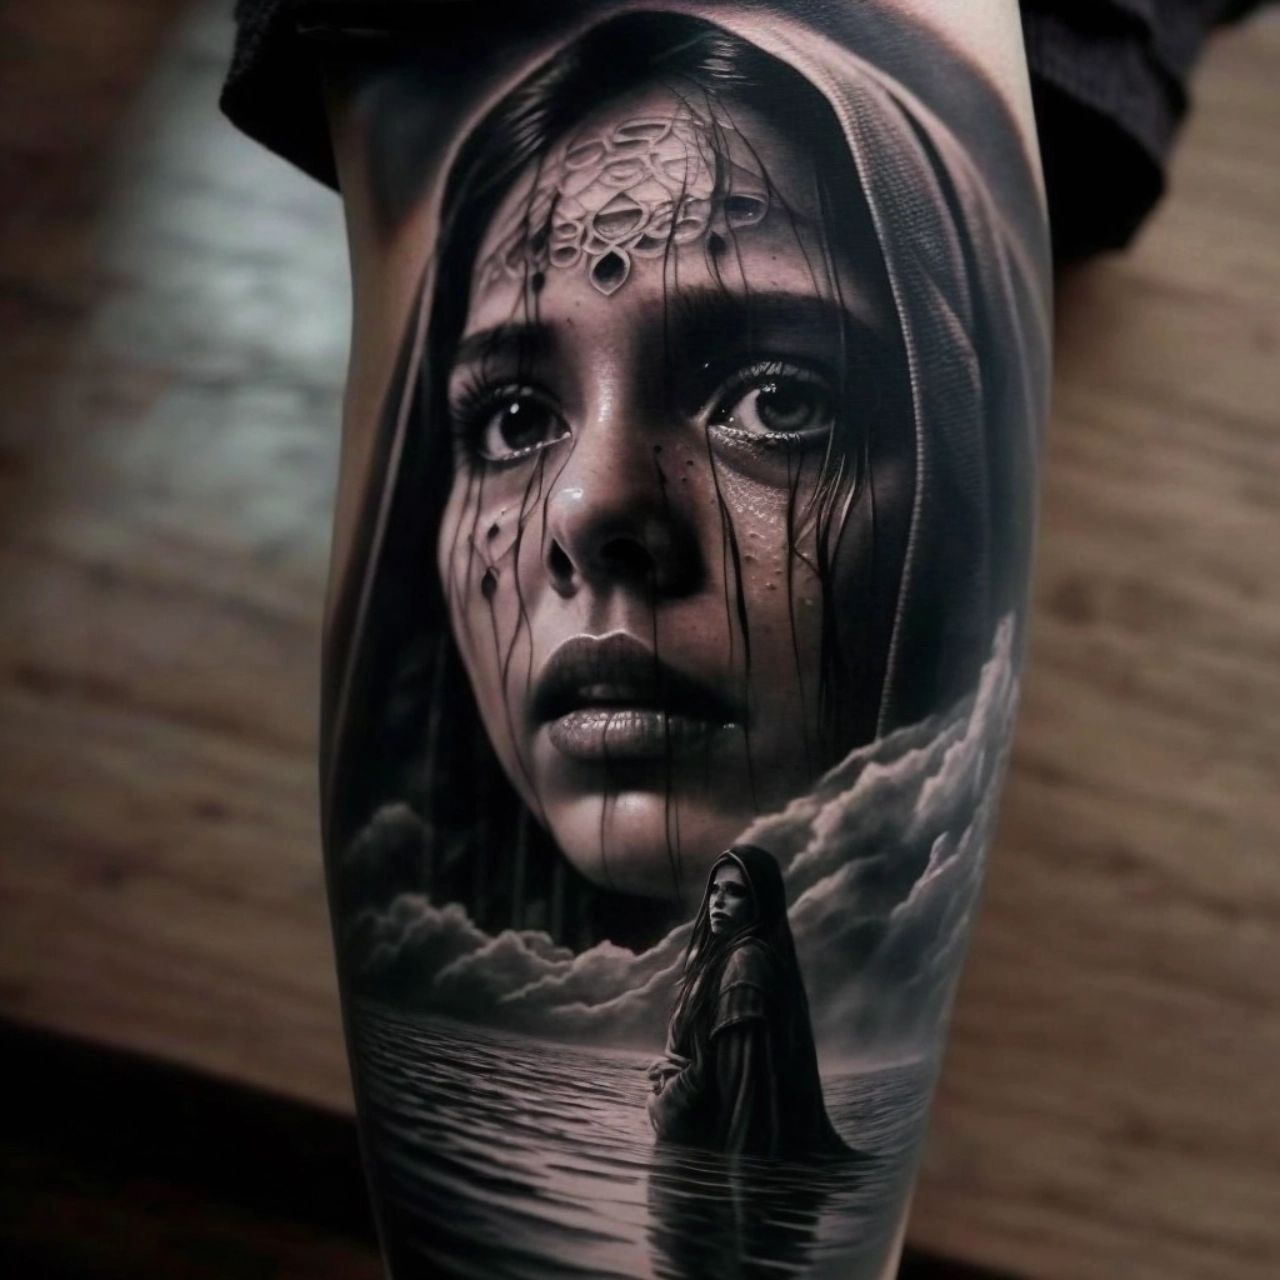 La Llorona Tattoo Meaning, Designs, Placements, Cost, Aftercare